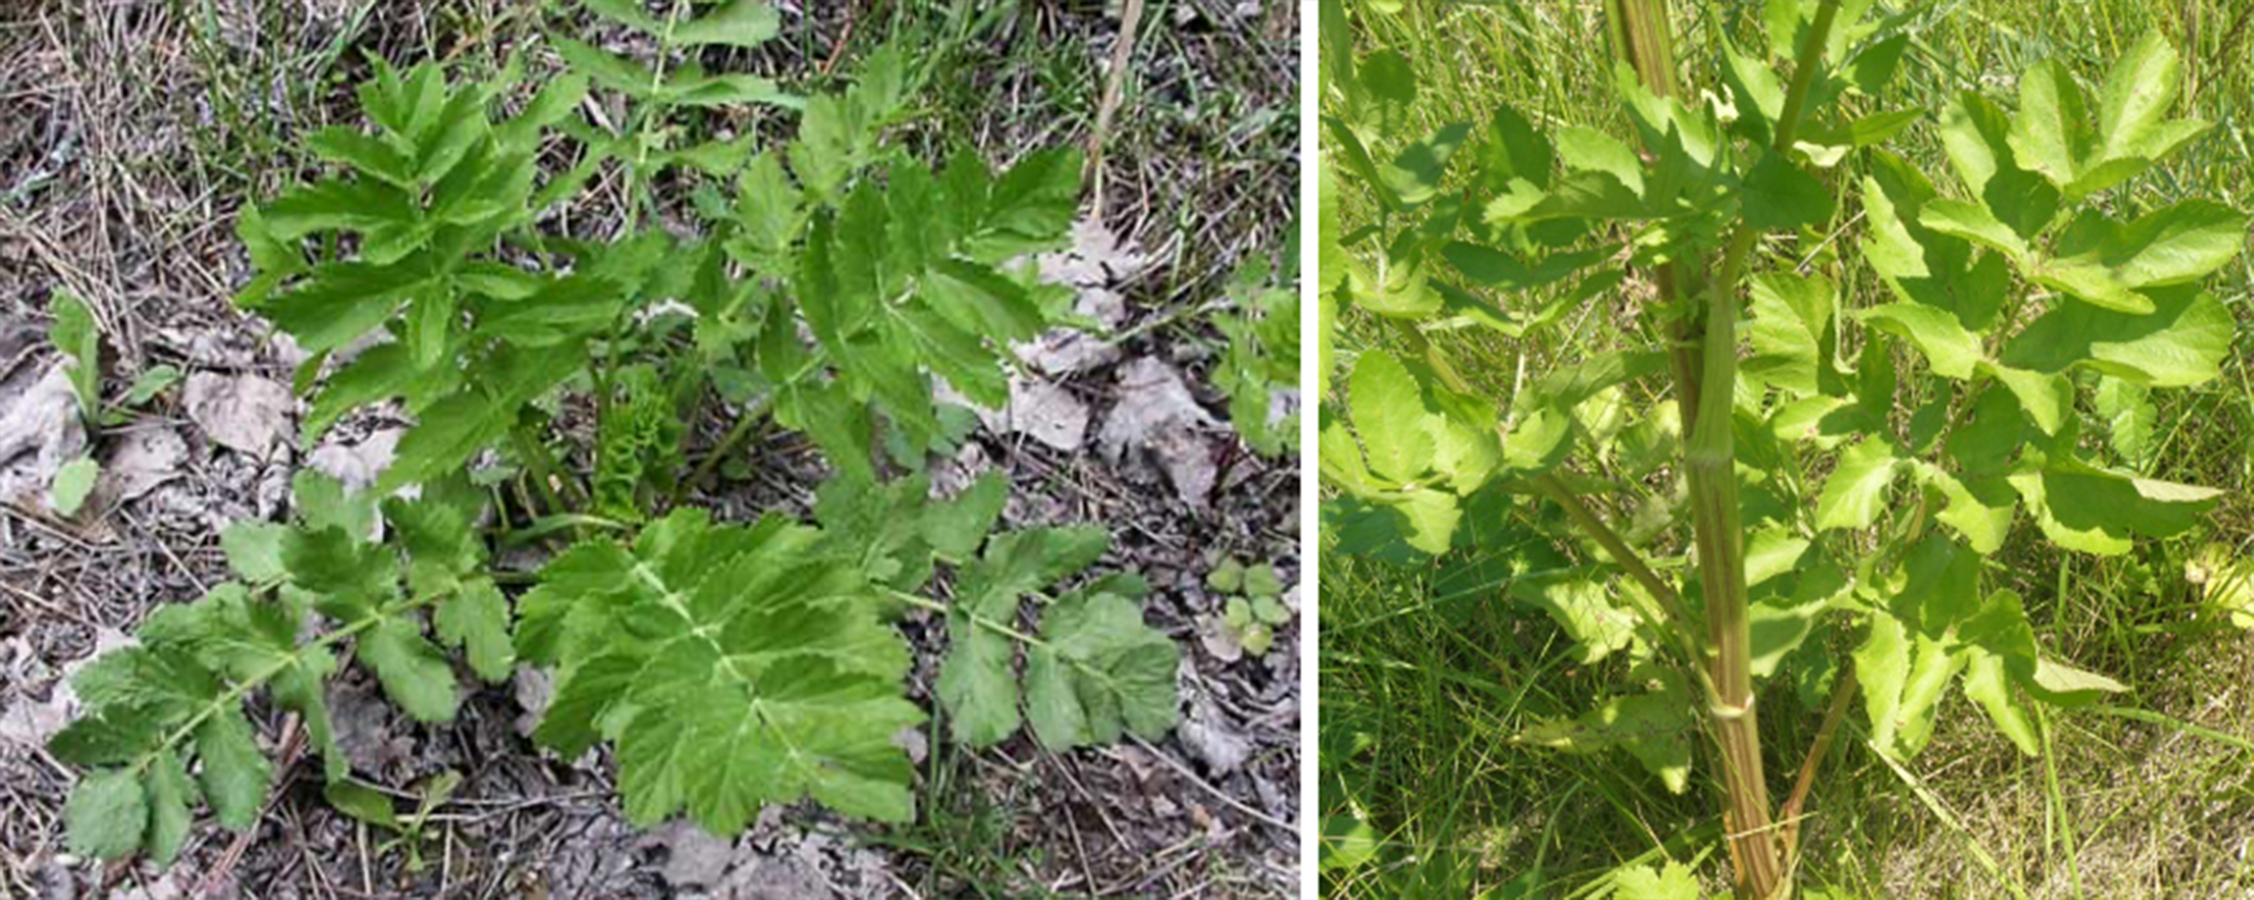 Example images of wild parsnip at various stages.